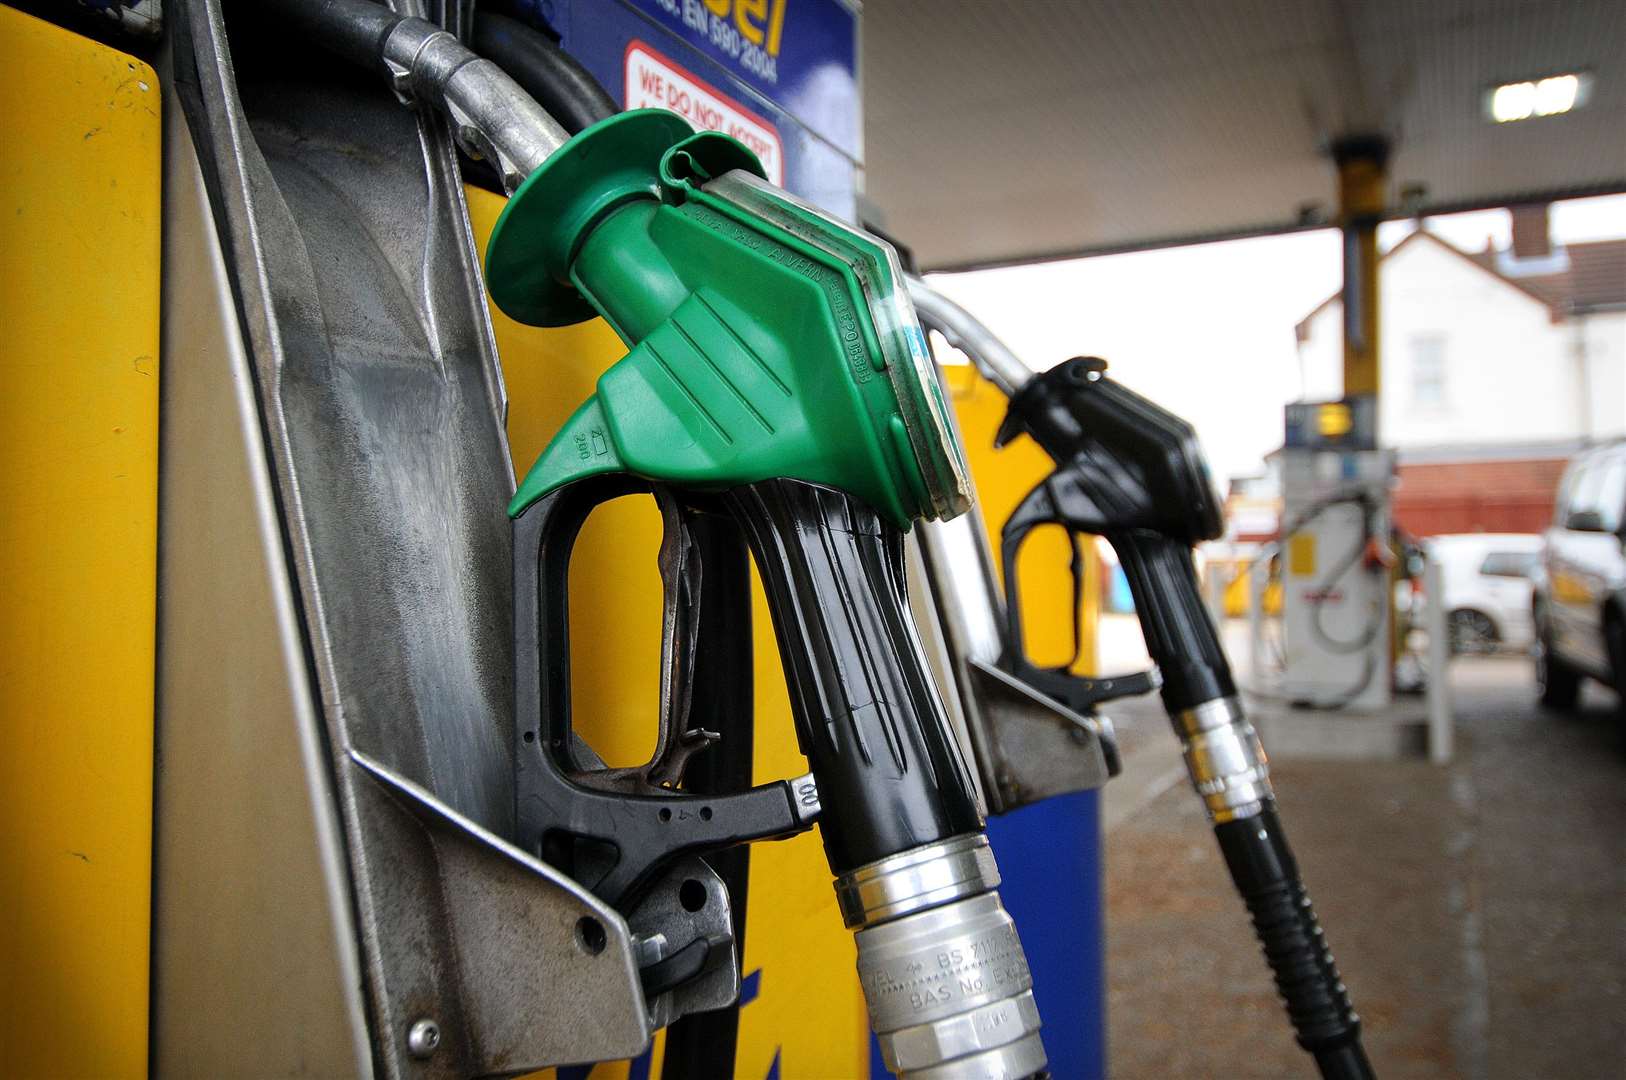 Councillors should not claim expenses for petrol if they can afford not to, it has been suggested